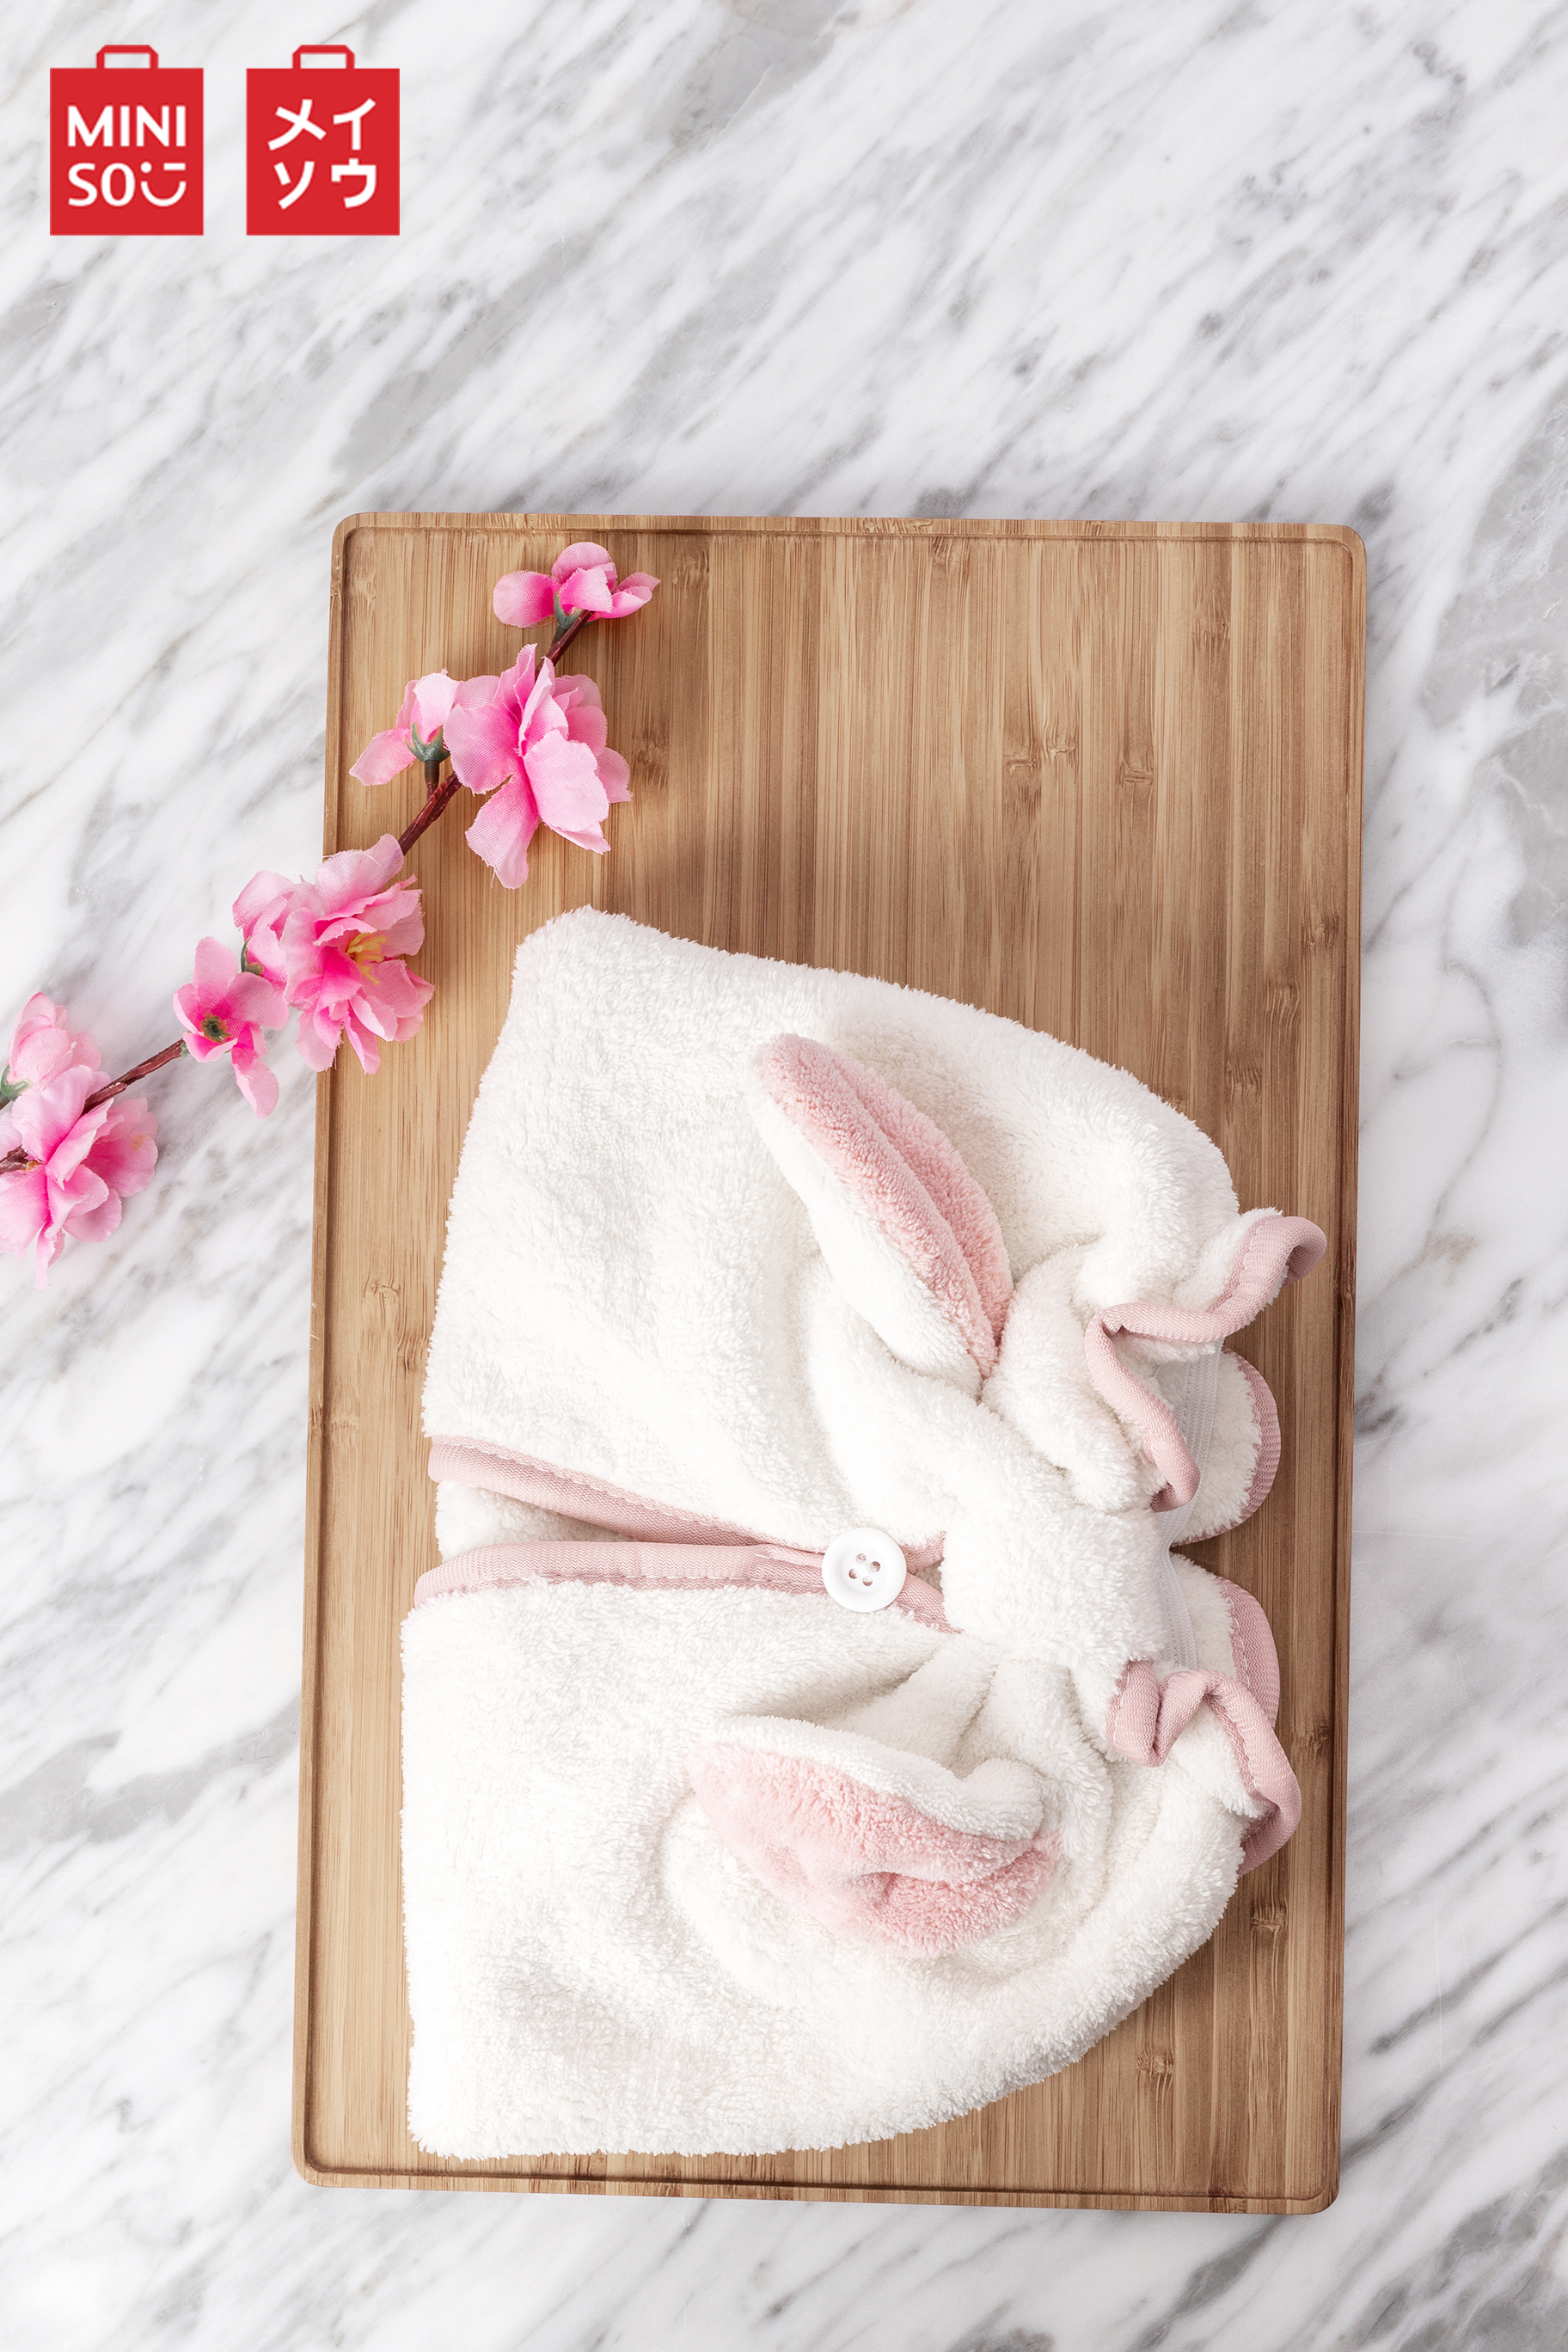 Super Absorbency Microfiber Hair Drying Turban with Rabbit Ears Wraps Towel   China Quick Drying Wrap Microfiber and Custom Hair Turban Towel price   MadeinChinacom